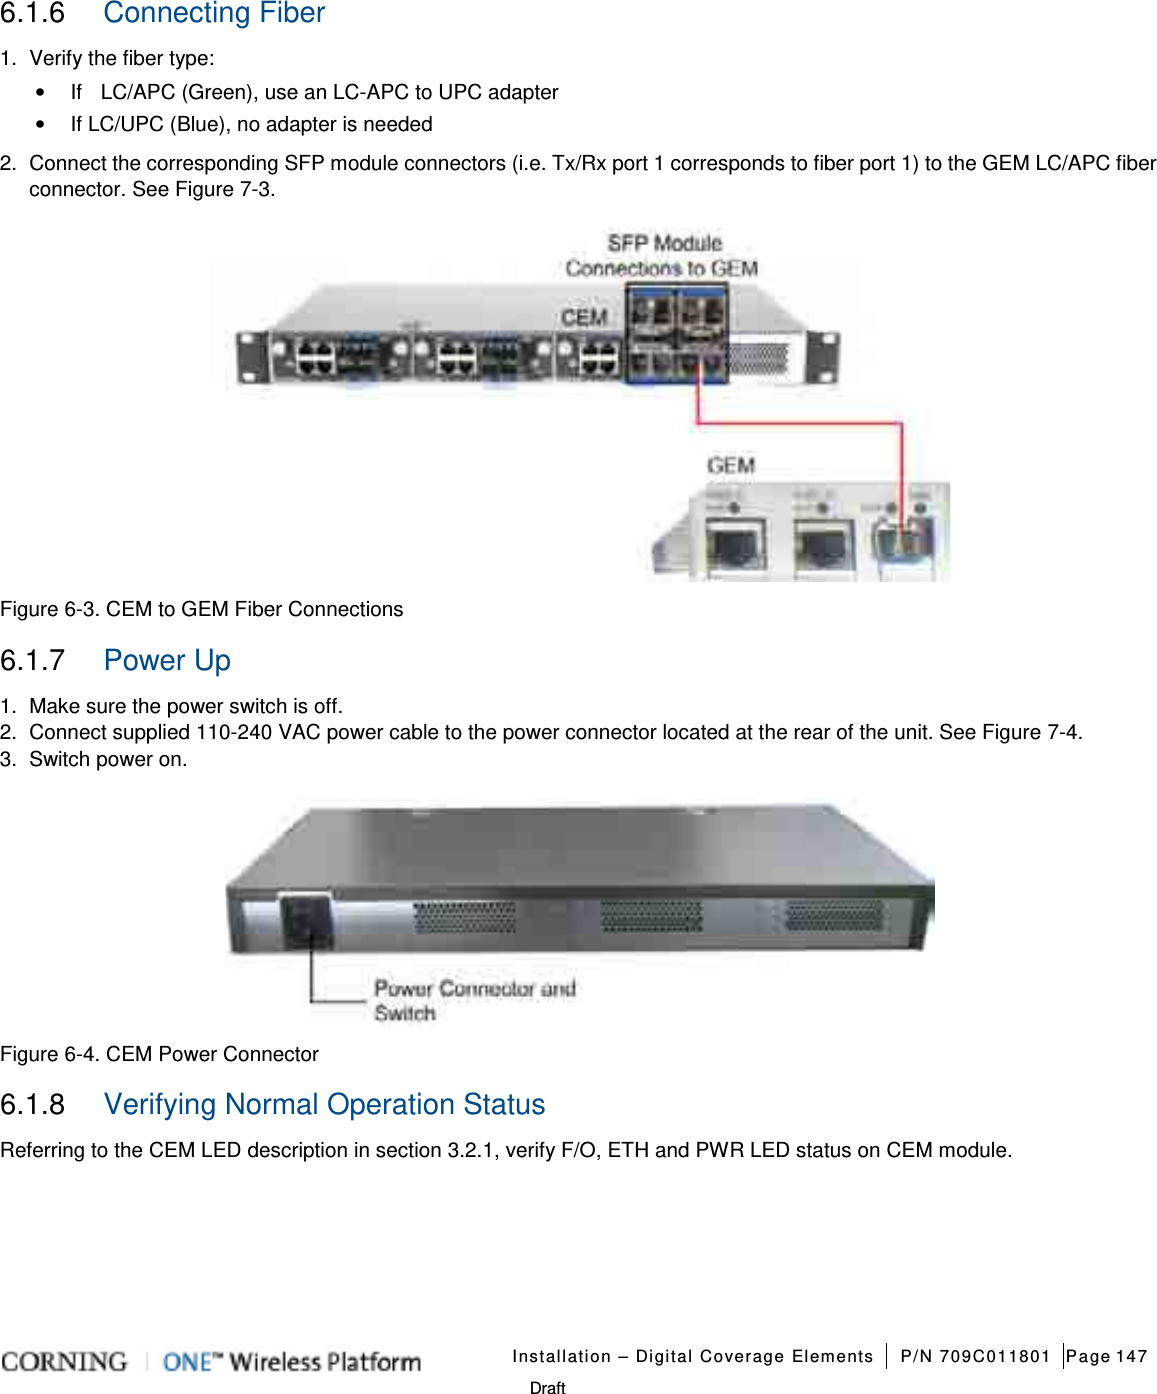   Installation – Digital Coverage Elements P/N 709C011801 Page 147   Draft 6.1.6  Connecting Fiber 1.  Verify the fiber type: • If    LC/APC (Green), use an LC-APC to UPC adapter • If LC/UPC (Blue), no adapter is needed 2.  Connect the corresponding SFP module connectors (i.e. Tx/Rx port 1 corresponds to fiber port 1) to the GEM LC/APC fiber connector. See Figure  7-3.    Figure  6-3. CEM to GEM Fiber Connections 6.1.7  Power Up 1.  Make sure the power switch is off. 2.  Connect supplied 110-240 VAC power cable to the power connector located at the rear of the unit. See Figure  7-4.   3.  Switch power on.  Figure  6-4. CEM Power Connector 6.1.8  Verifying Normal Operation Status Referring to the CEM LED description in section  3.2.1, verify F/O, ETH and PWR LED status on CEM module.   